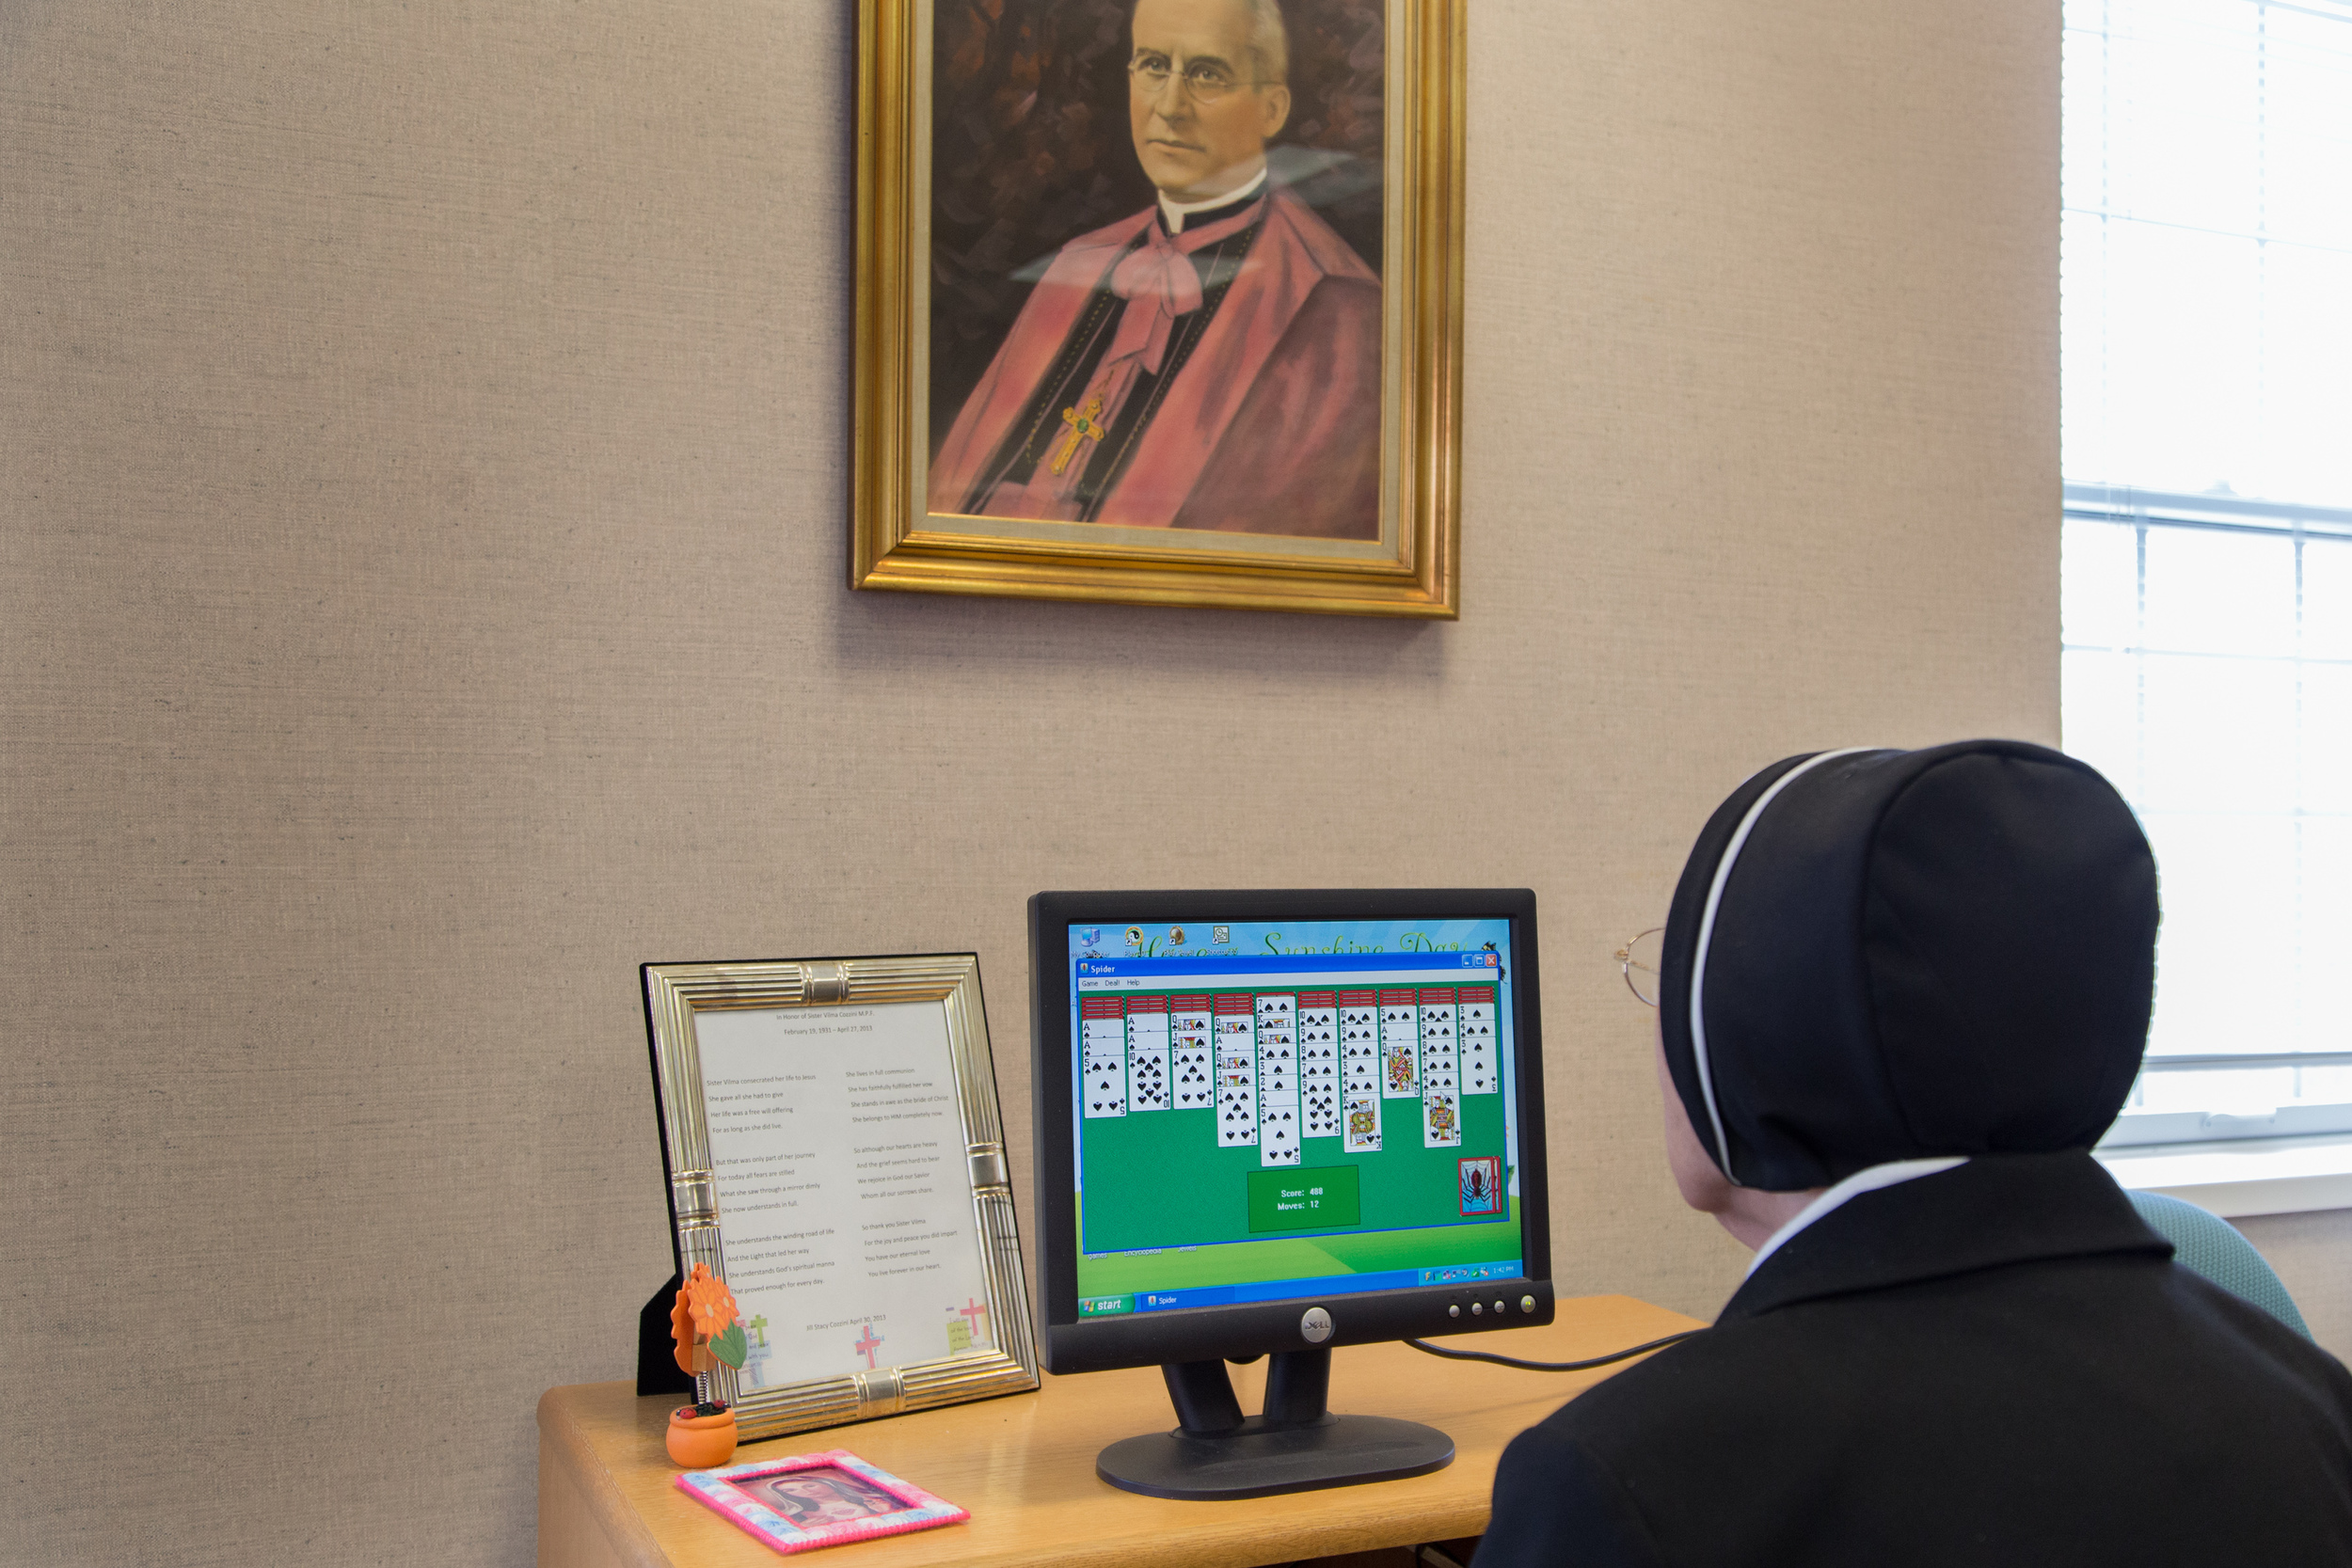  A Sister who works in the infirmary library, takes time out of her day to play an on-line game of Black Widow Solitaire. 